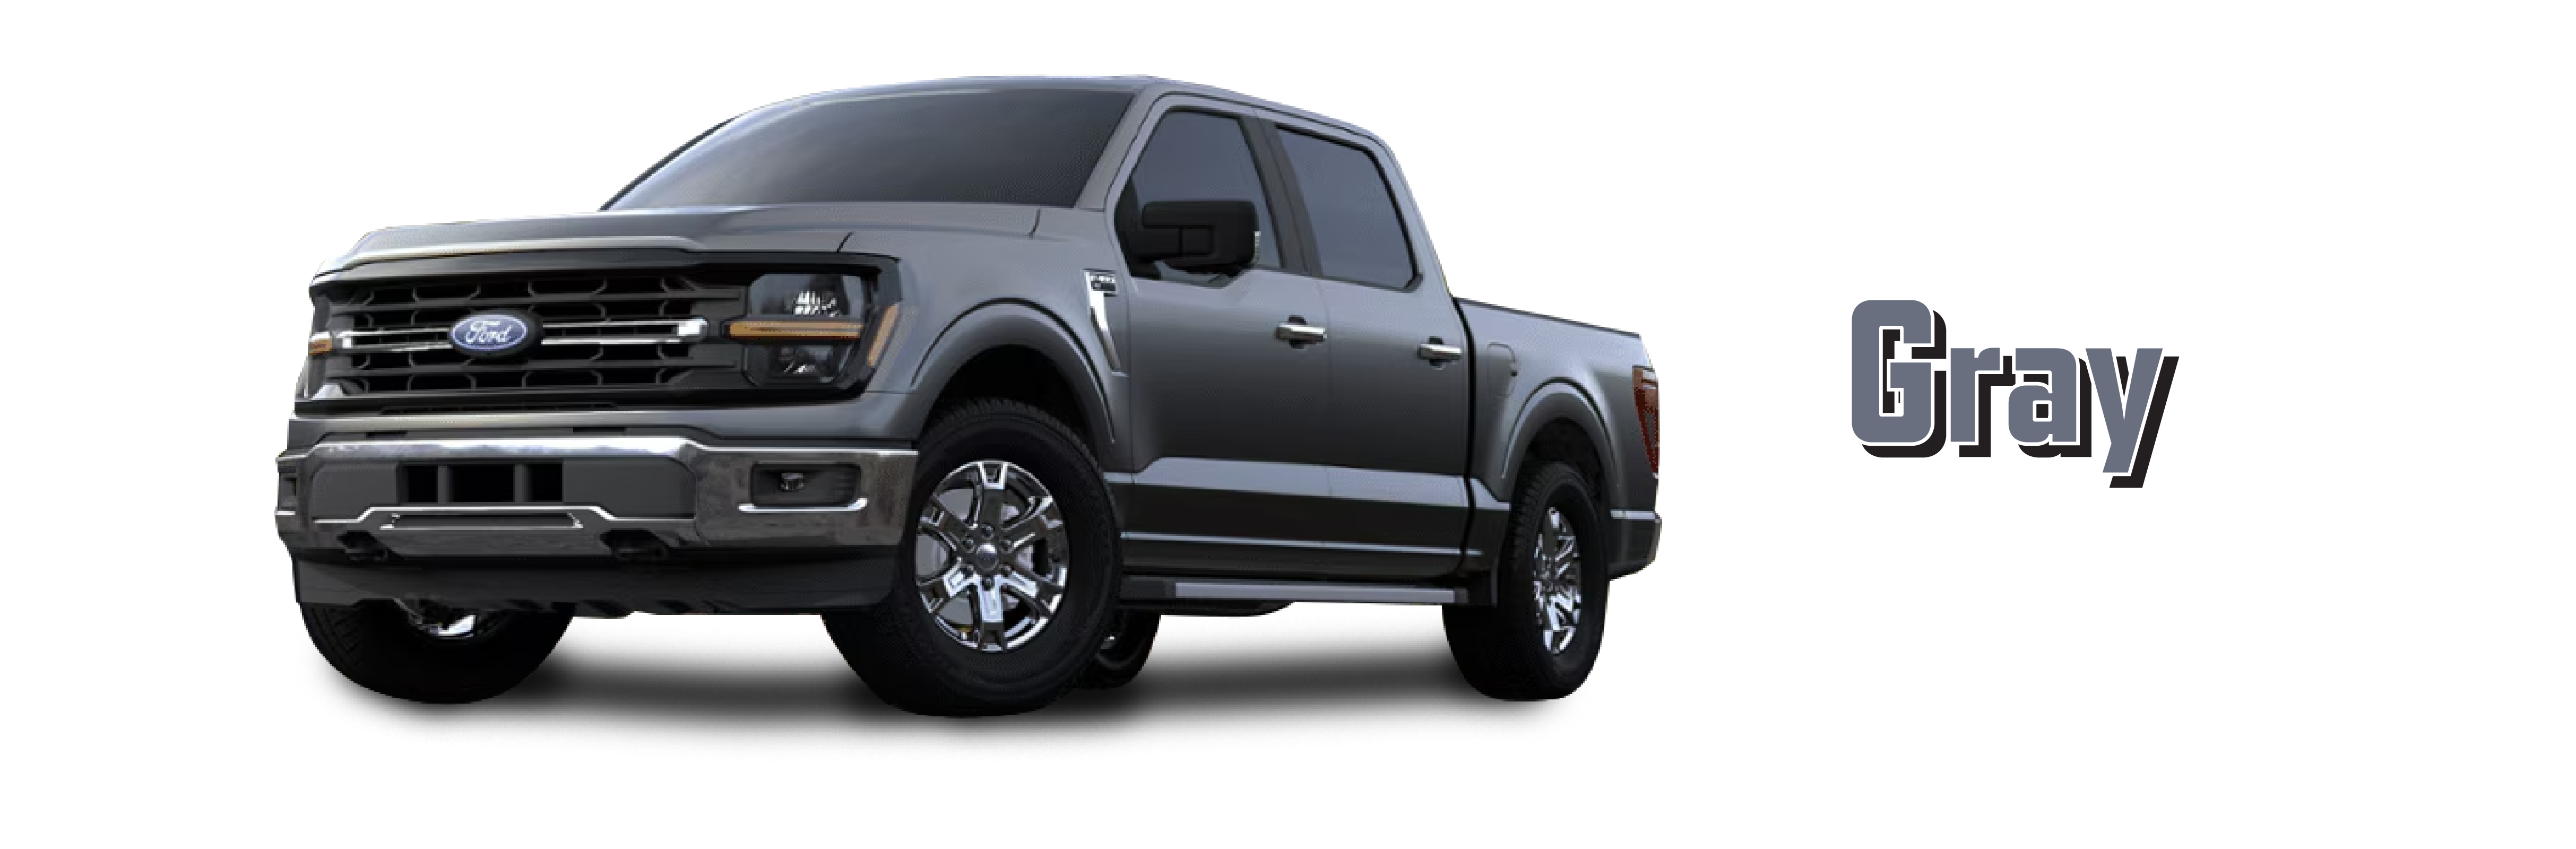 Gray Ford F-150